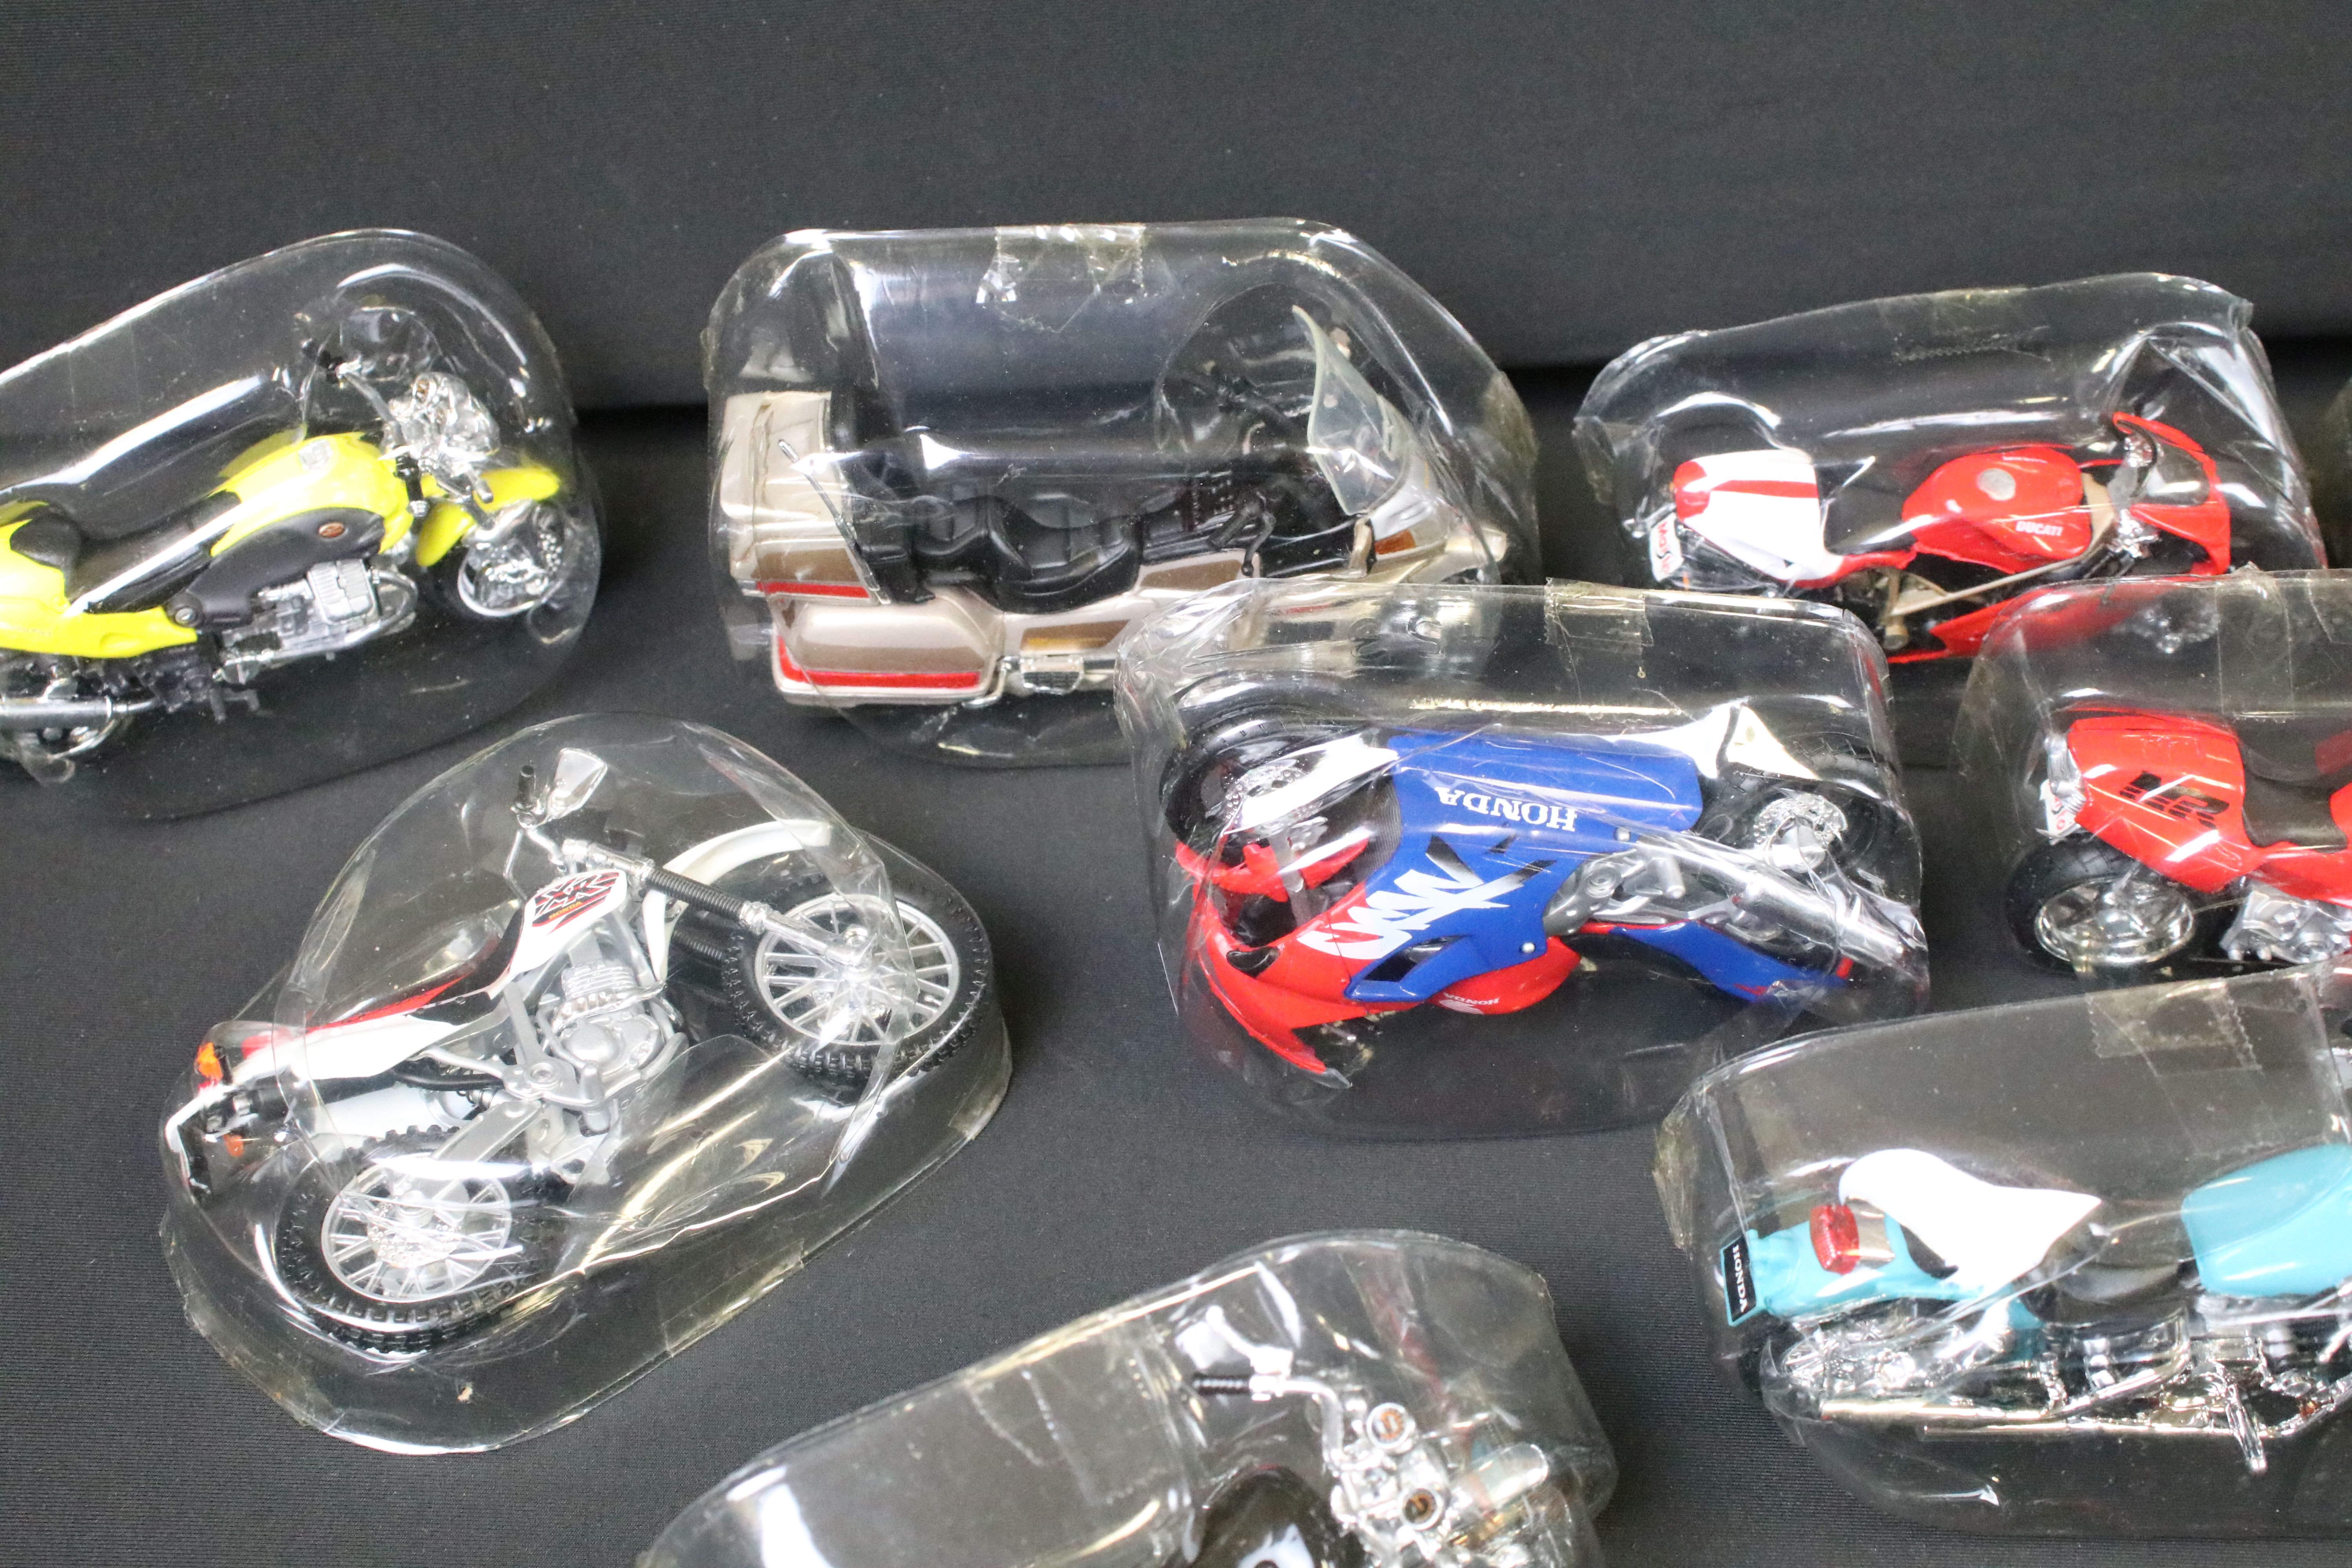 28 Maisto diecast motorbike models, all with plastic packaging and bases, ex - Image 8 of 12